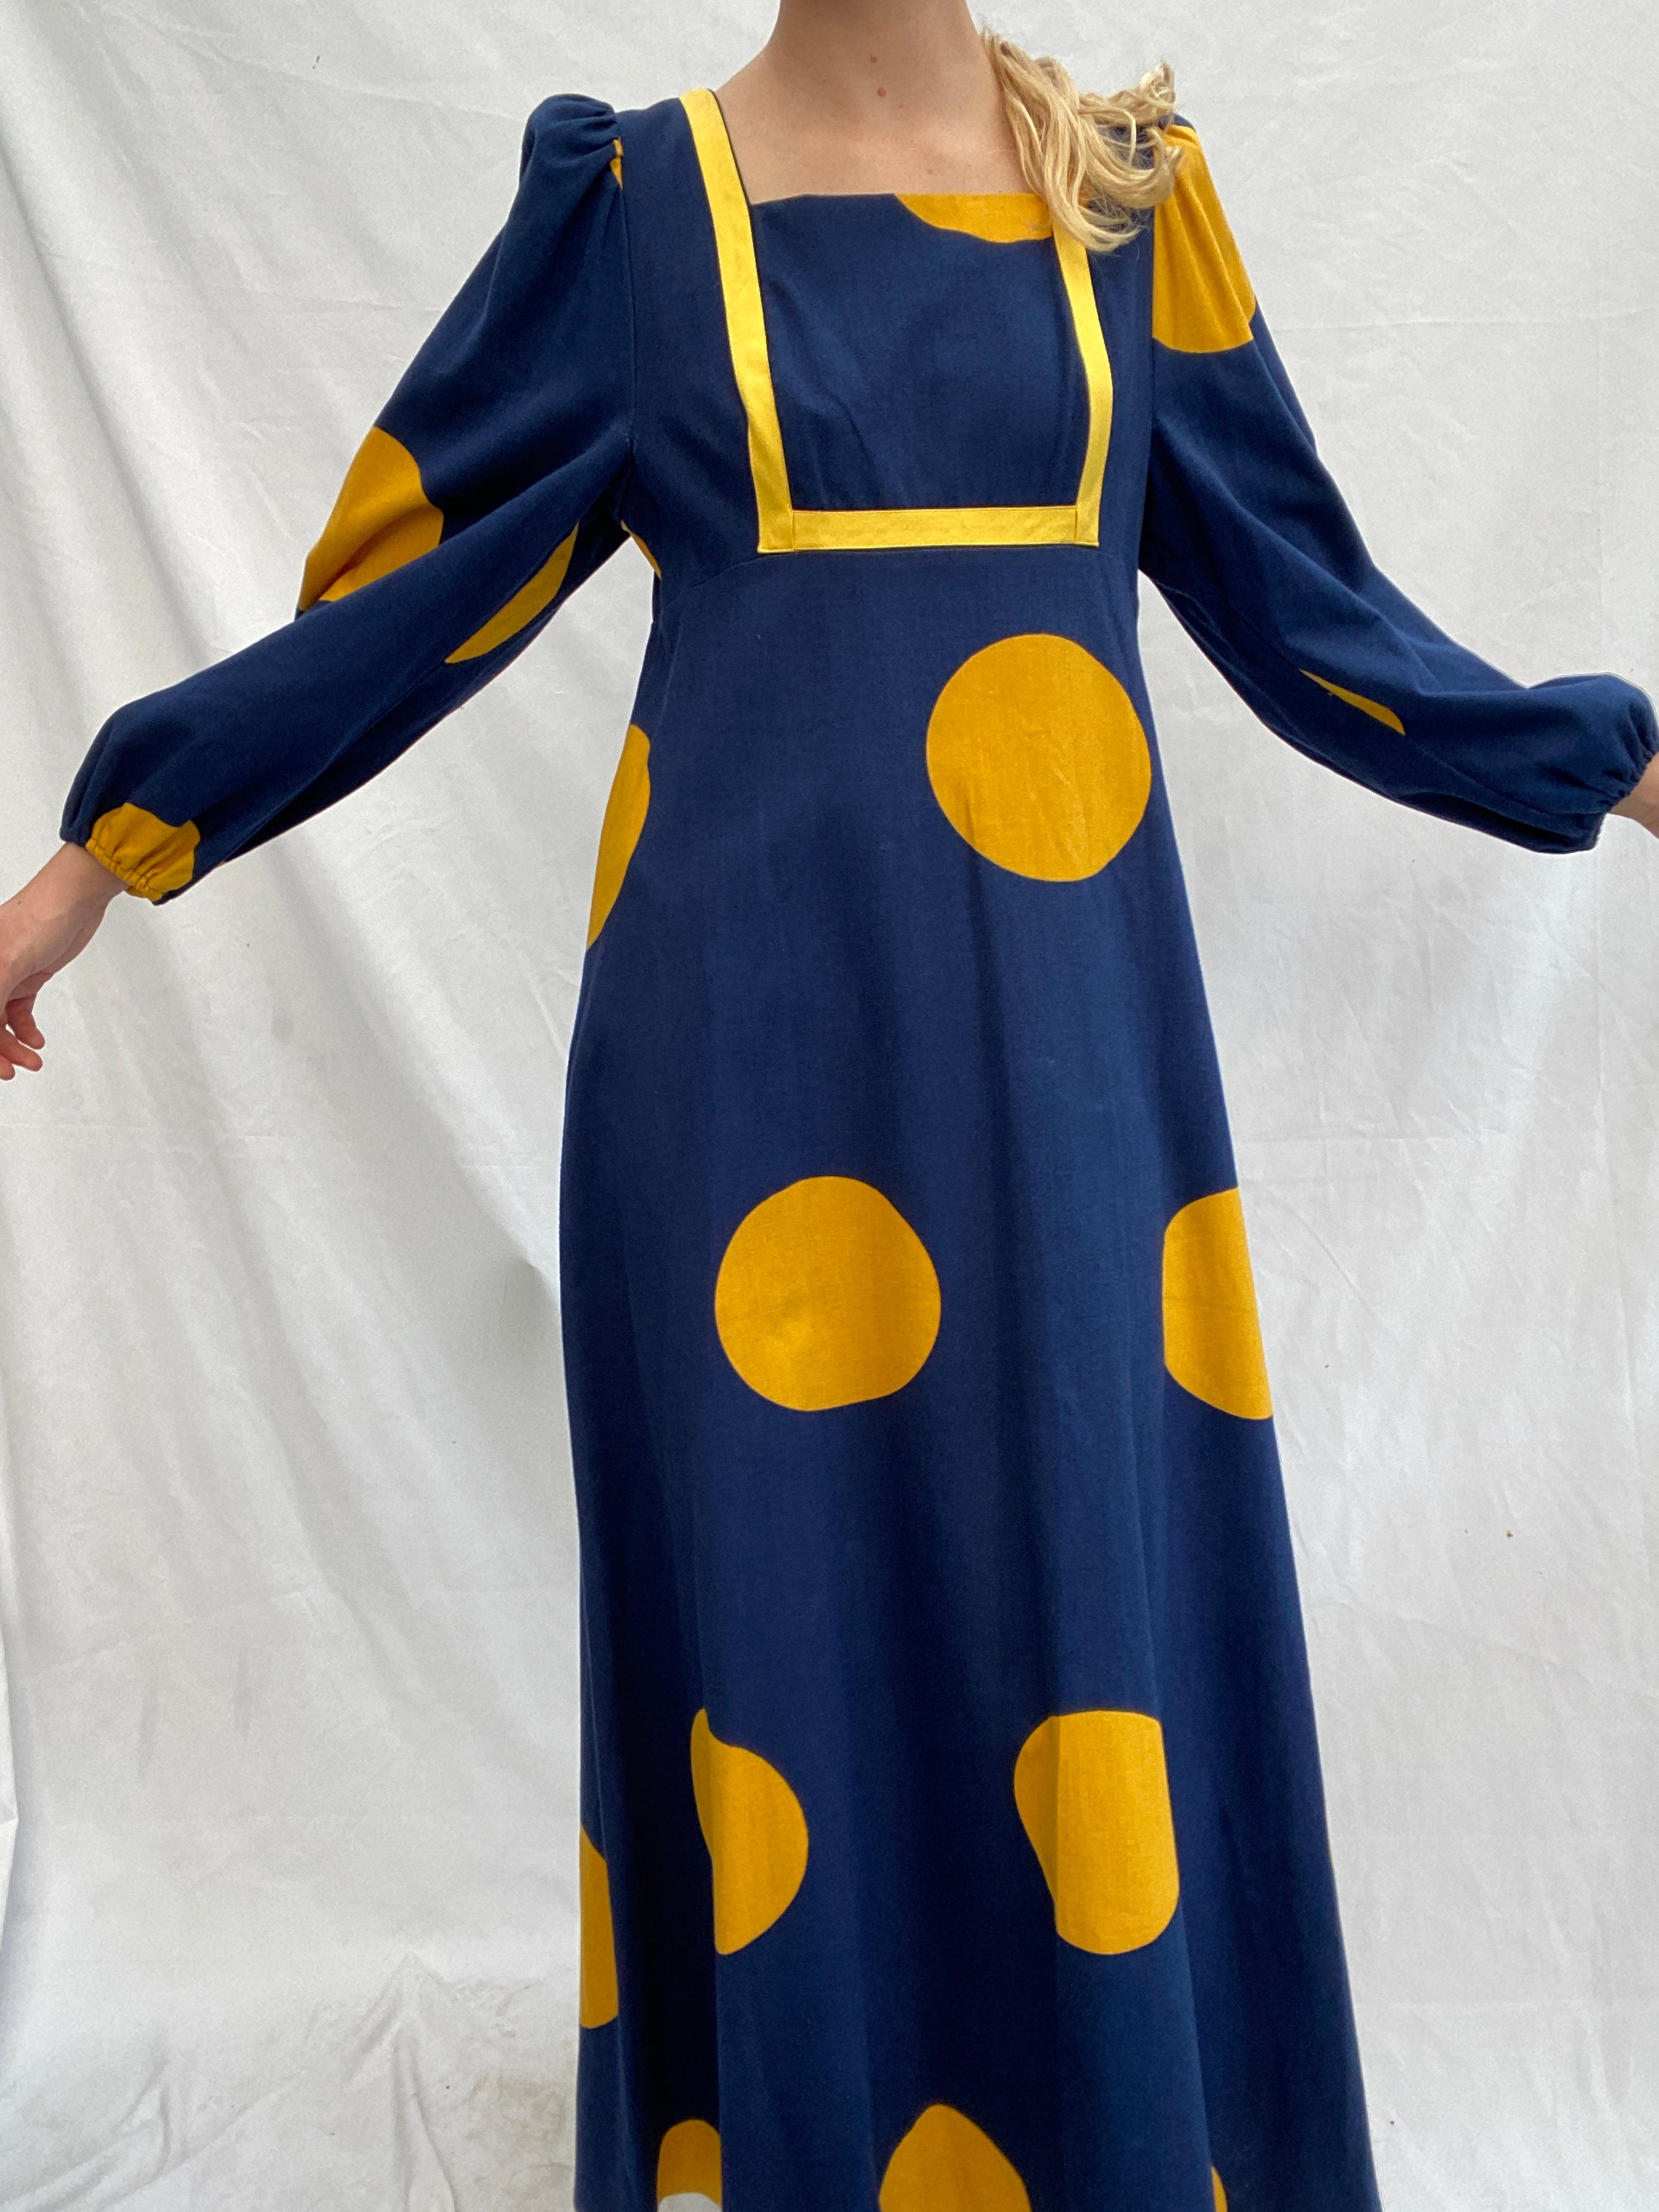 70's Long Sleeve Navy Dress with Yellow Circles